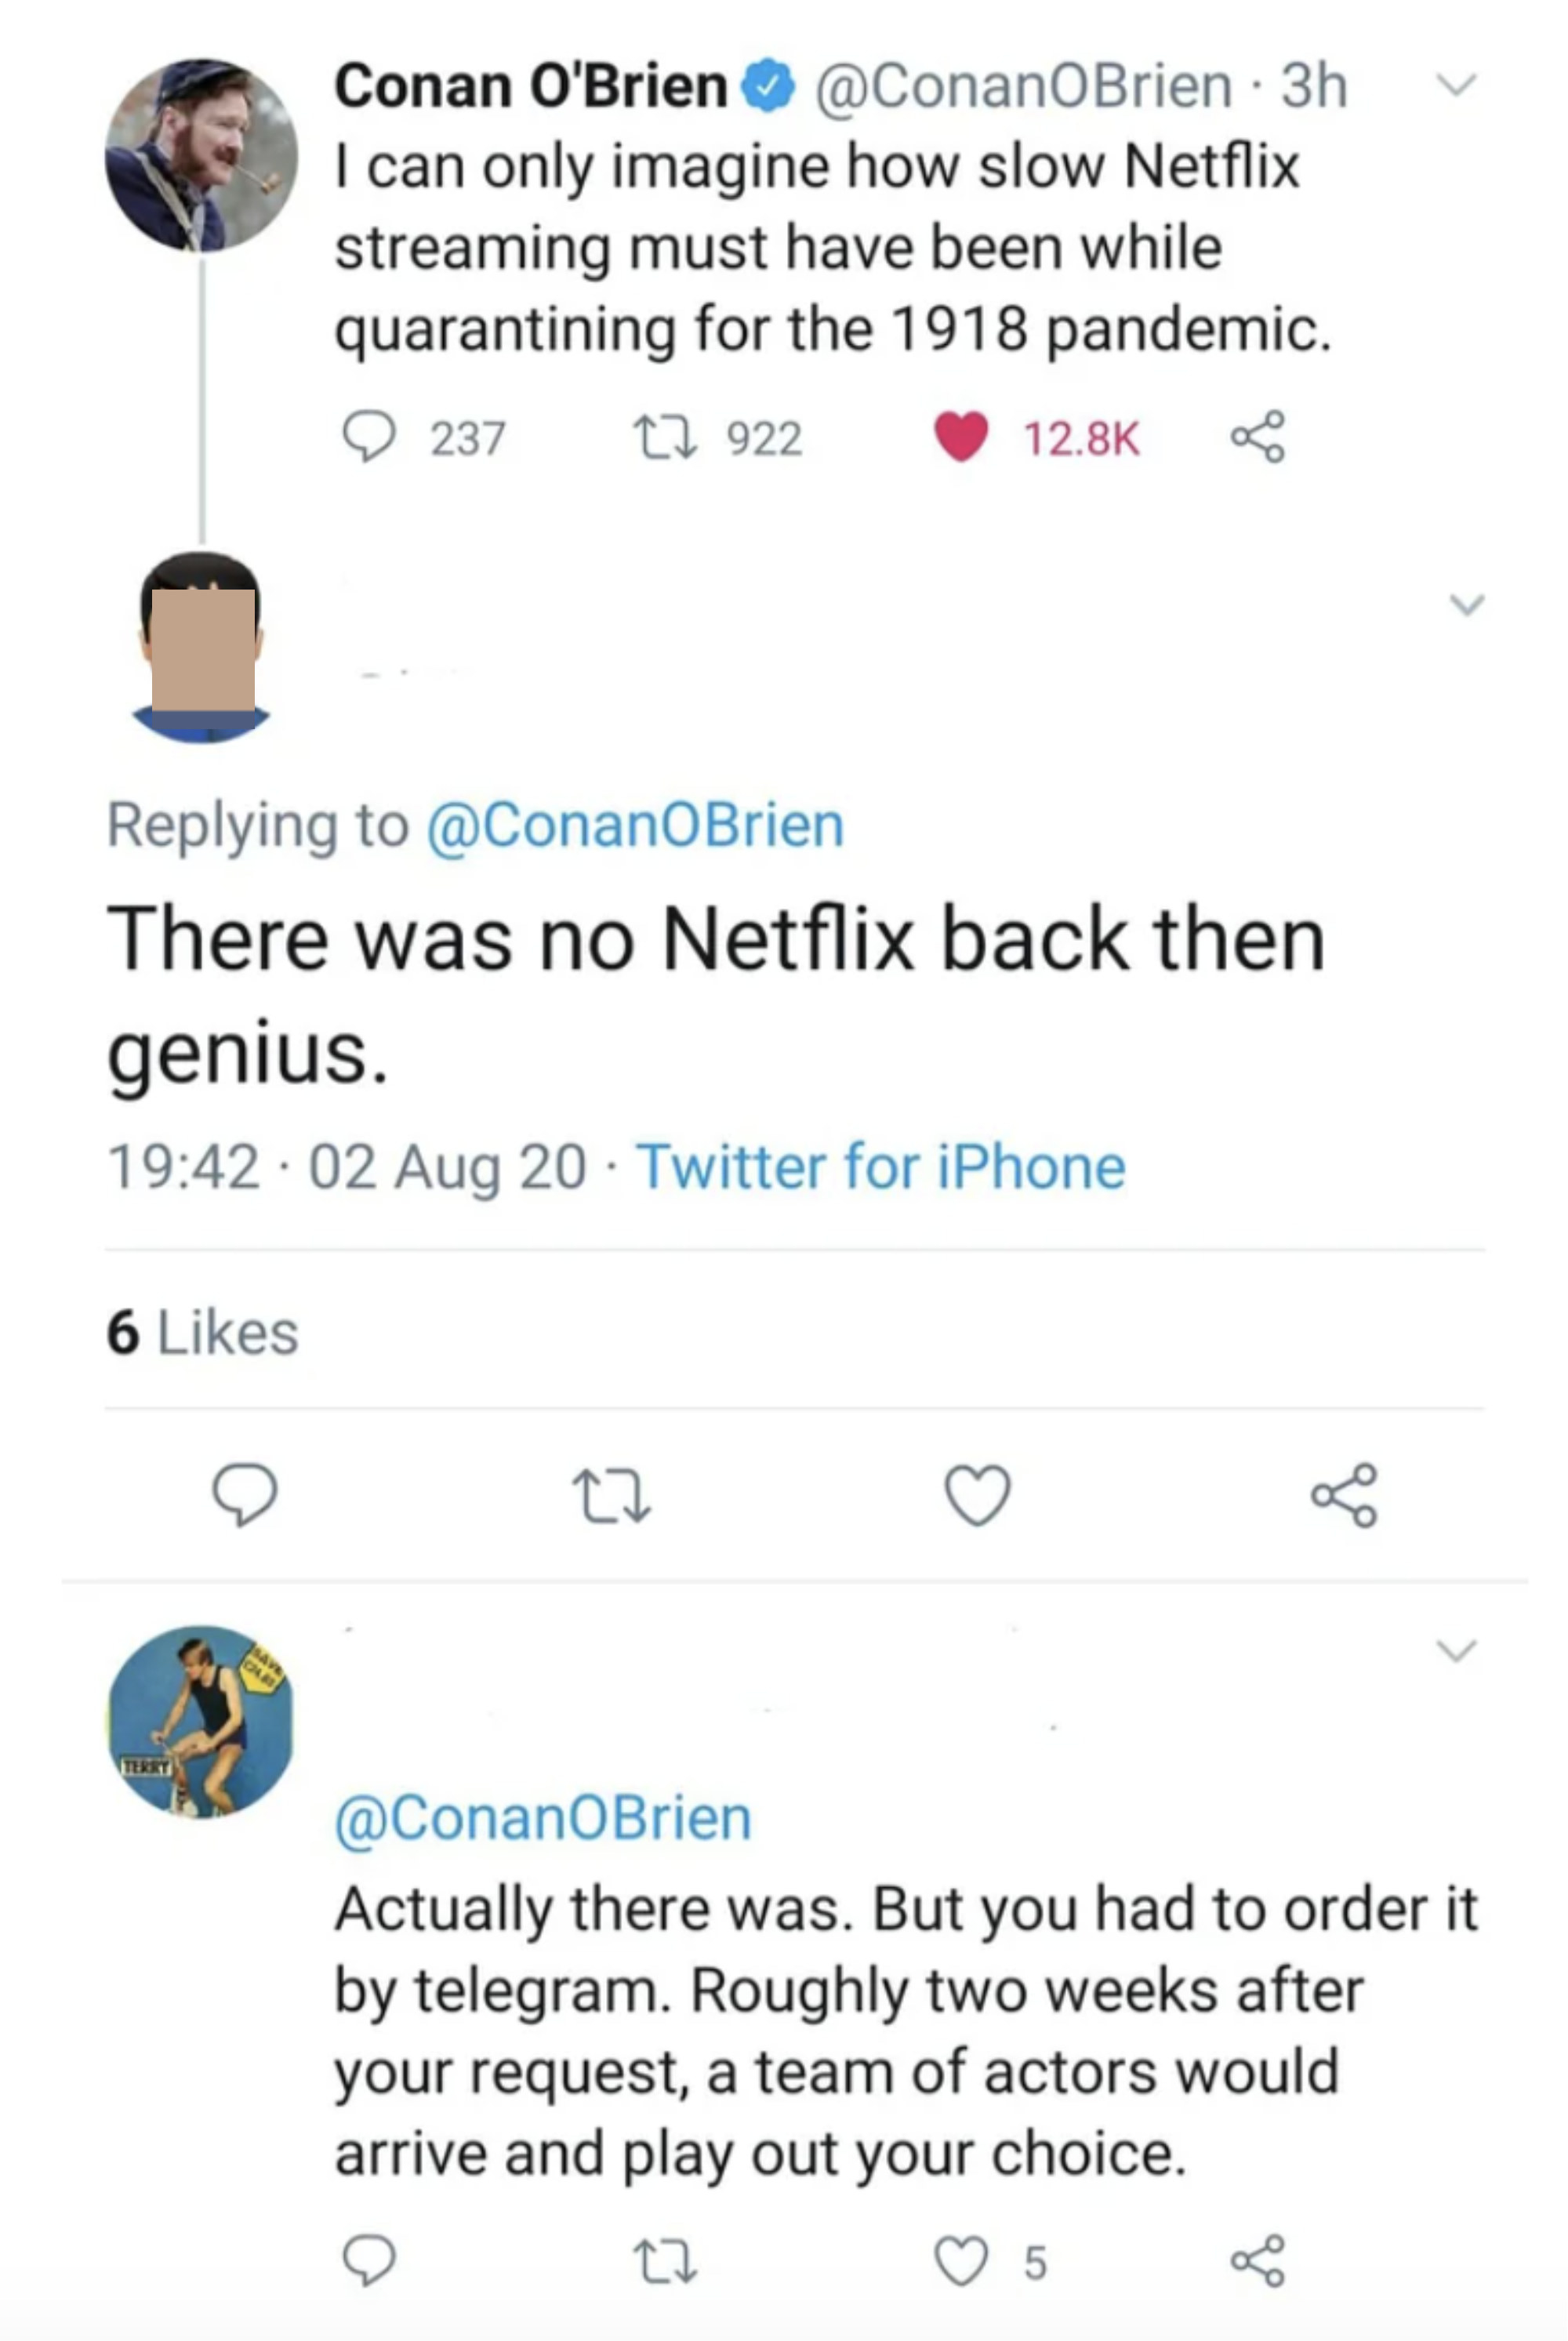 "There was no Netflix back then genius"